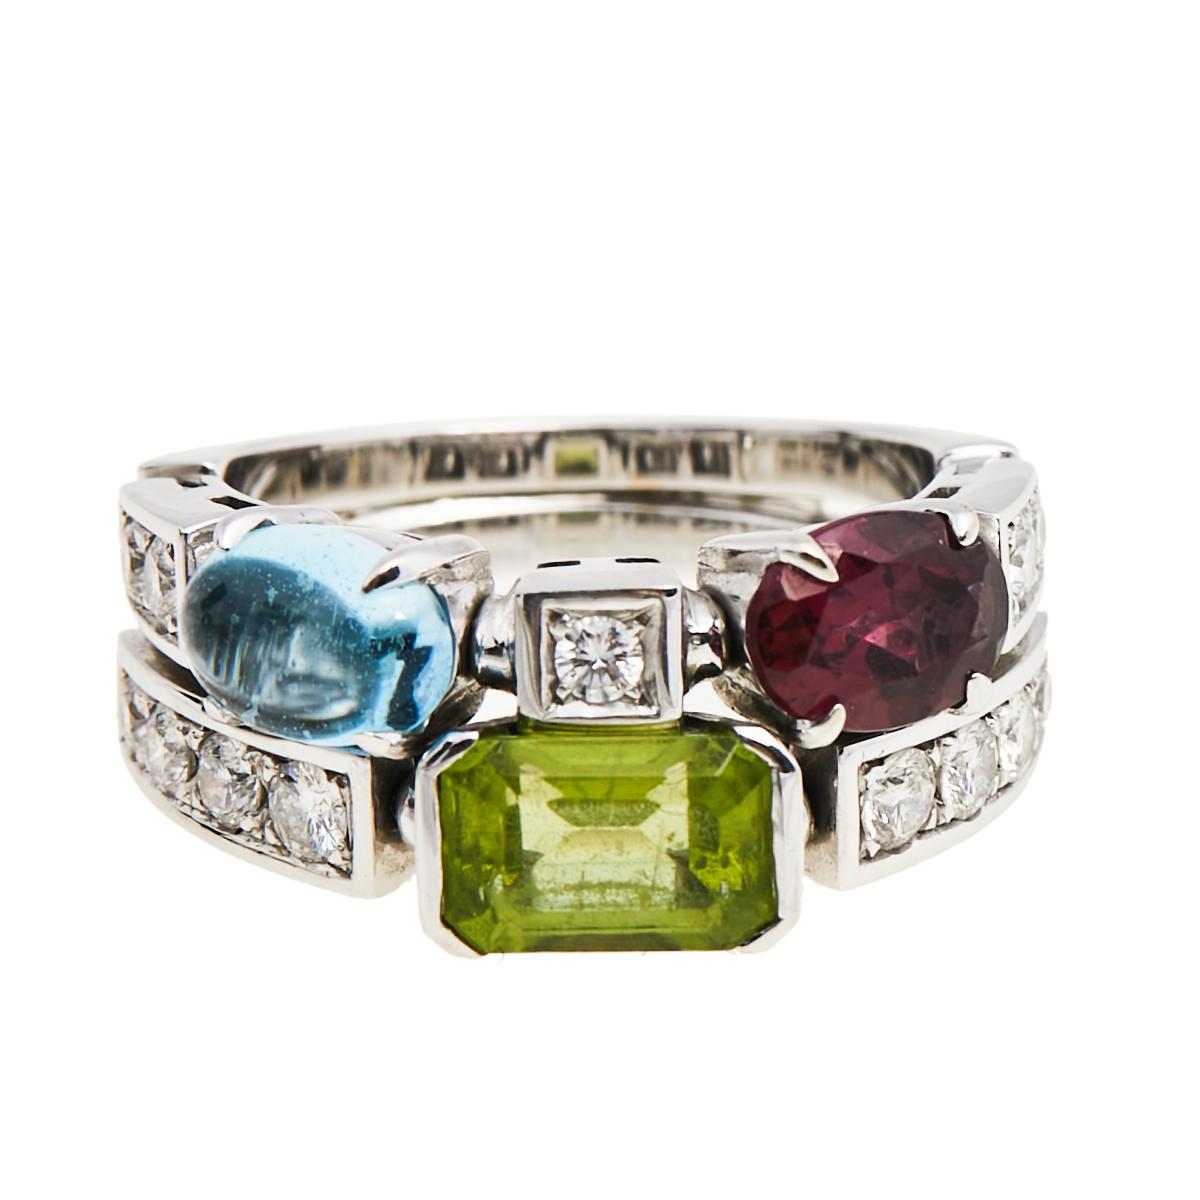 Beautiful and feminine, this ethereal cocktail ring is a statement piece that is designed to complement its wearer on any day. This gorgeous piece is rendered in 18K white gold and has a beautiful assortment of shimmery diamonds, a garnet, peridot,